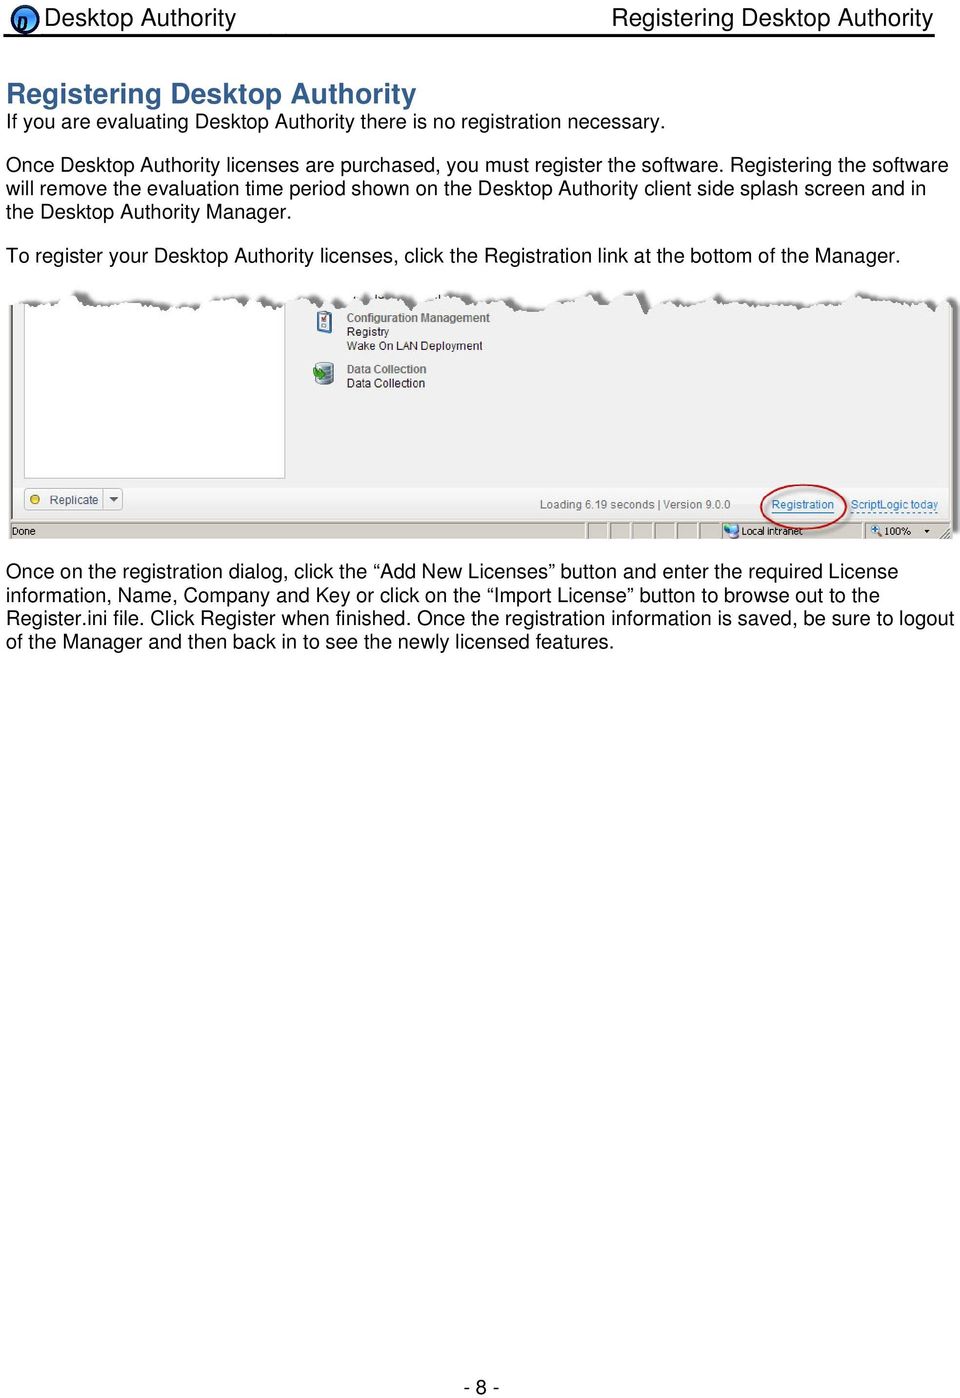 Registering the software will remove the evaluation time period shown on the Desktop Authority client side splash screen and in the Desktop Authority Manager.